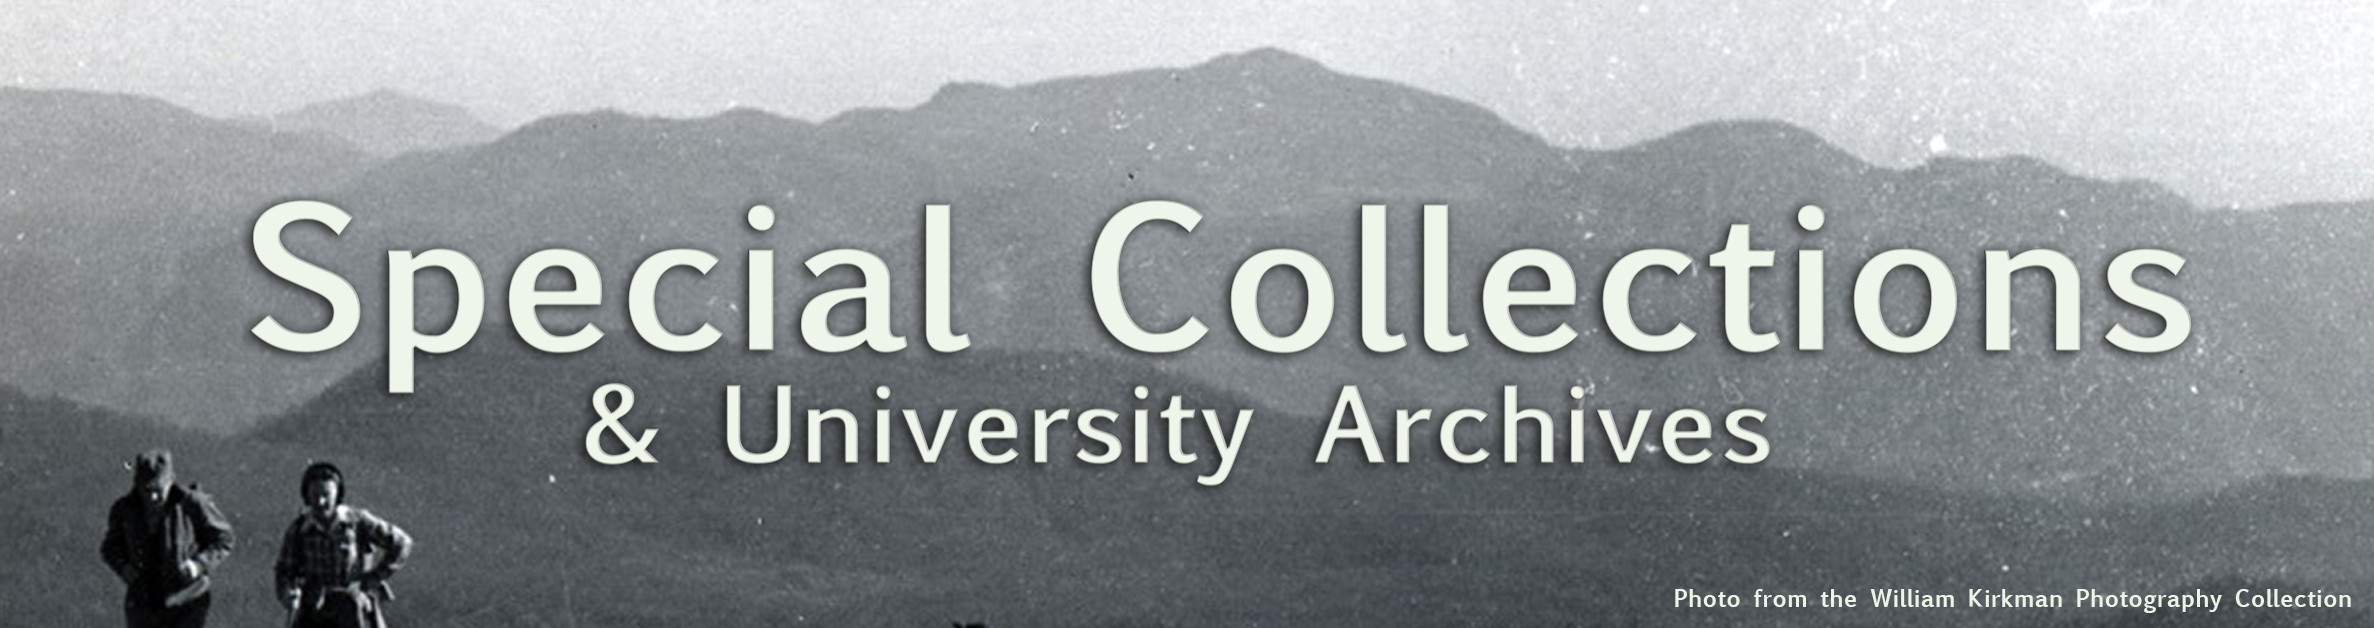 D. H. Ramsey Library Special Collections and University Archives